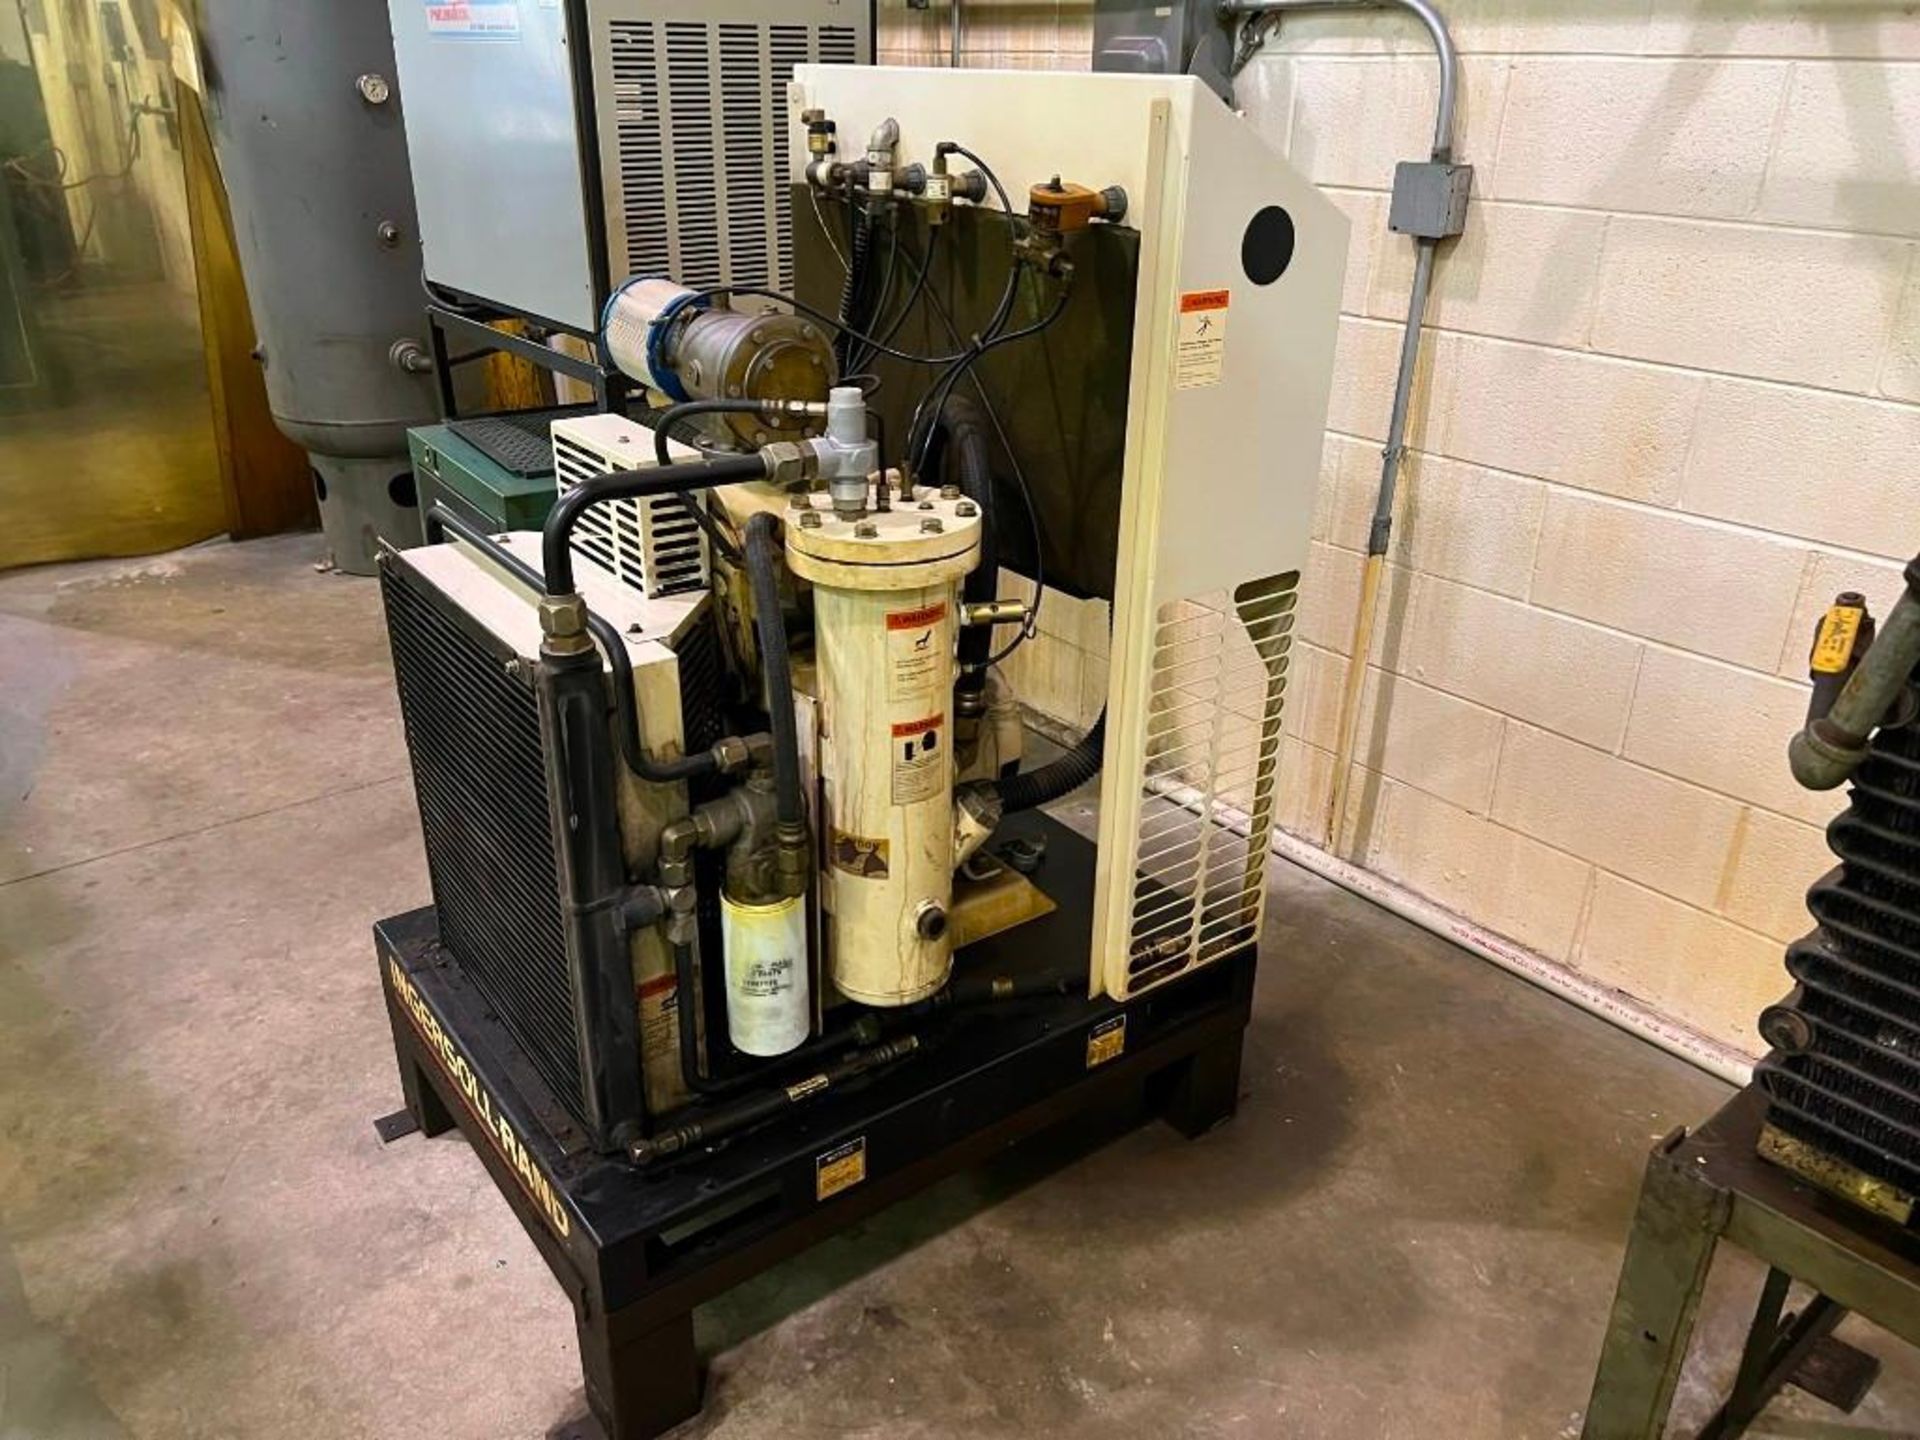 Ingersoll Rand 25HP Rotary Screw Air Compressor Model SSR-EP25SE, S/N KN0128495010, with Speedaire D